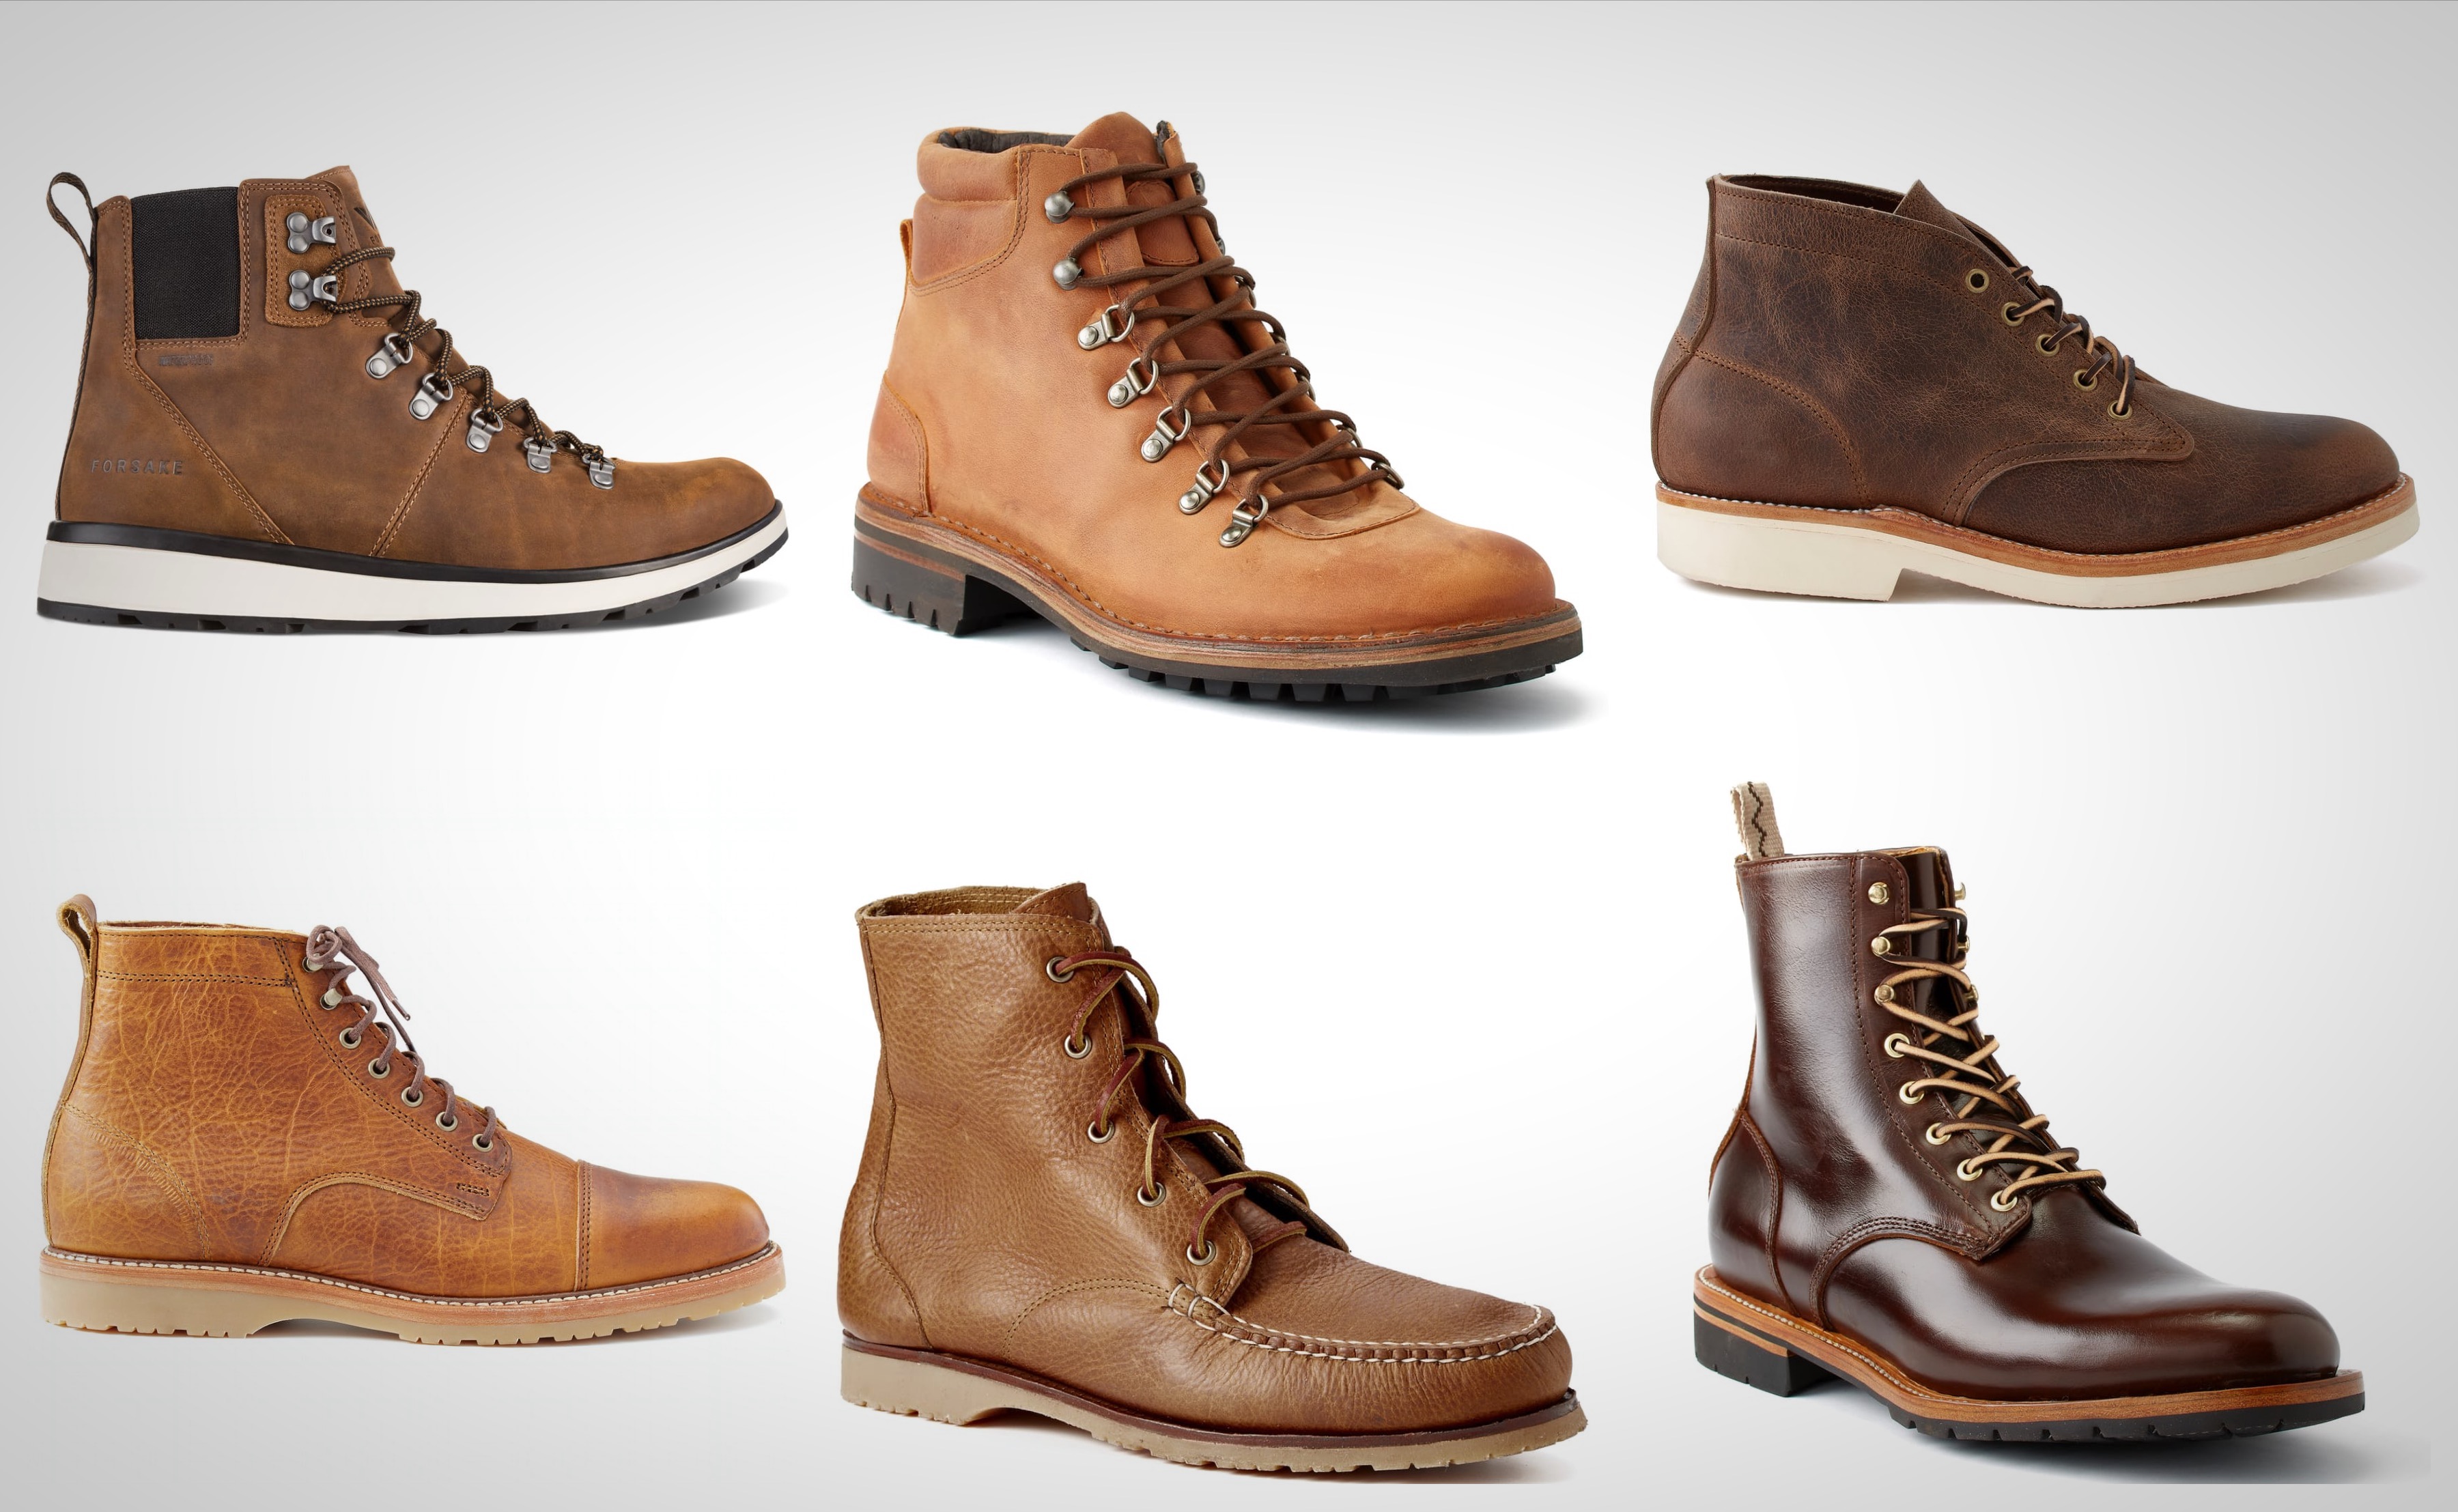 Save Up To 40% Right Now On These Rugged And Stylish Leather Boots In ...